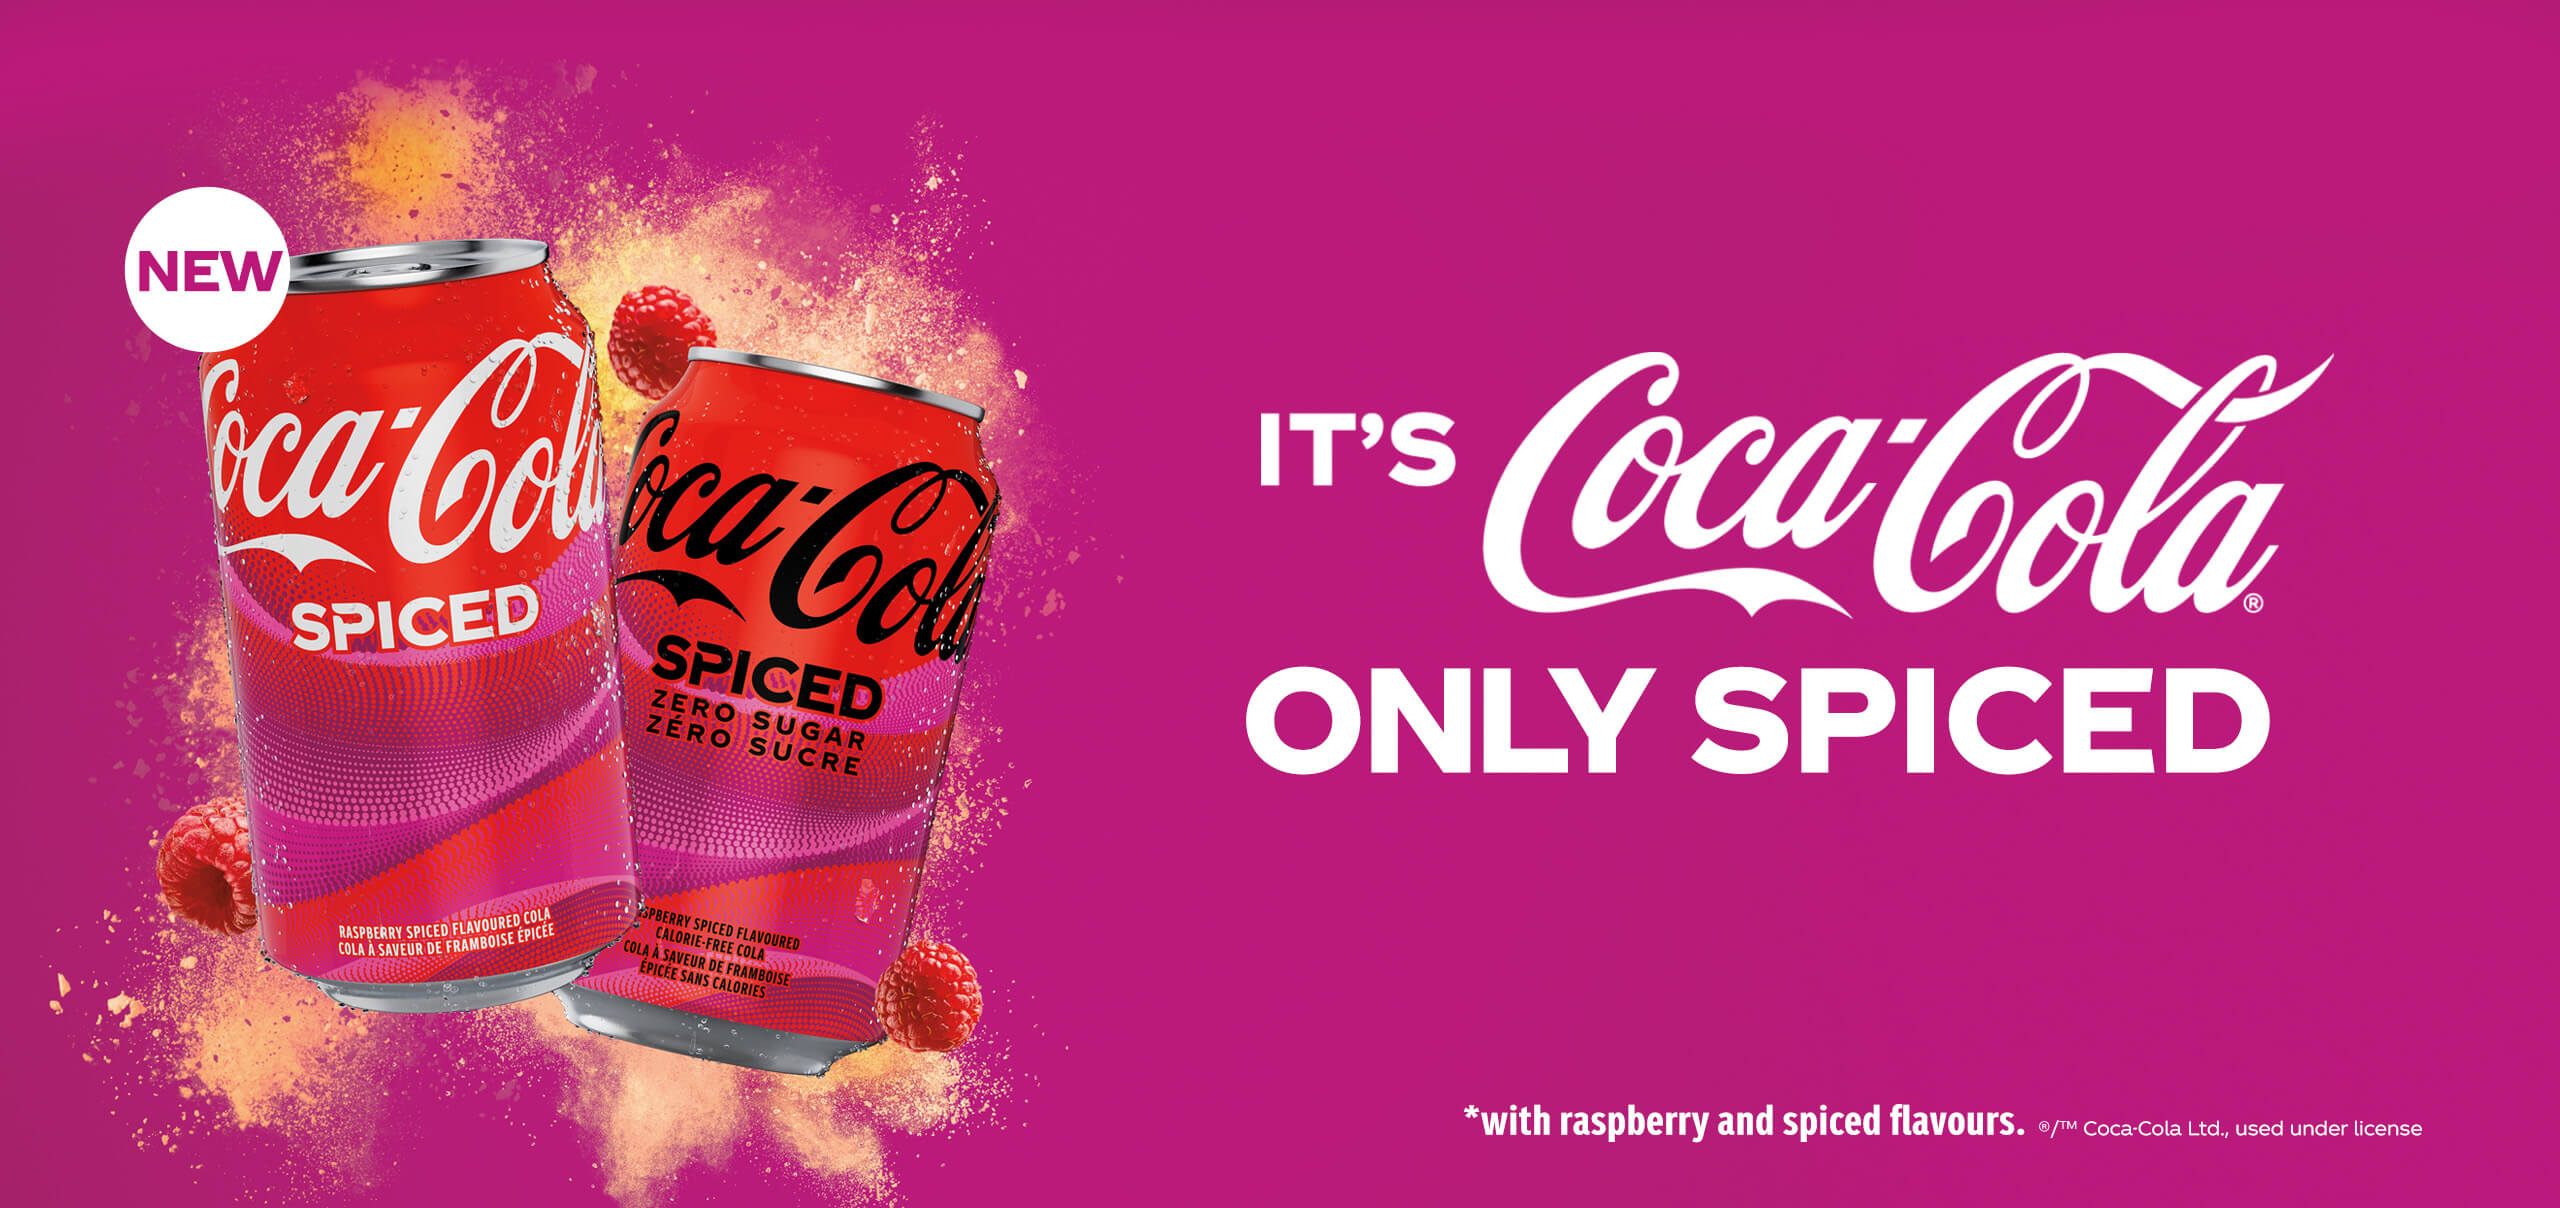 It's Coca-Cola only spiced.